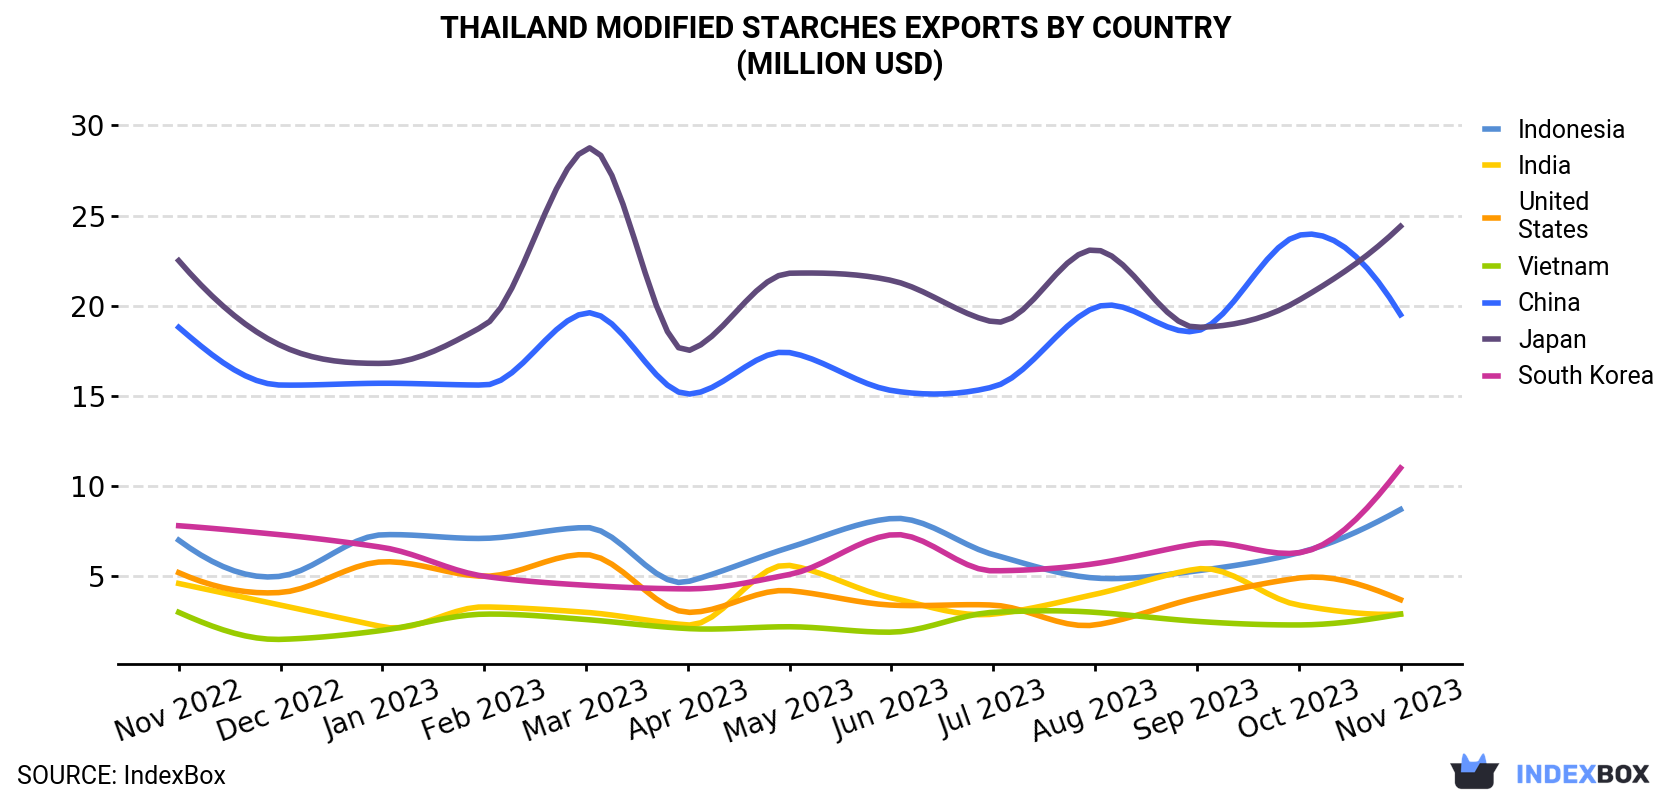 Thailand Modified Starches Exports By Country (Million USD)